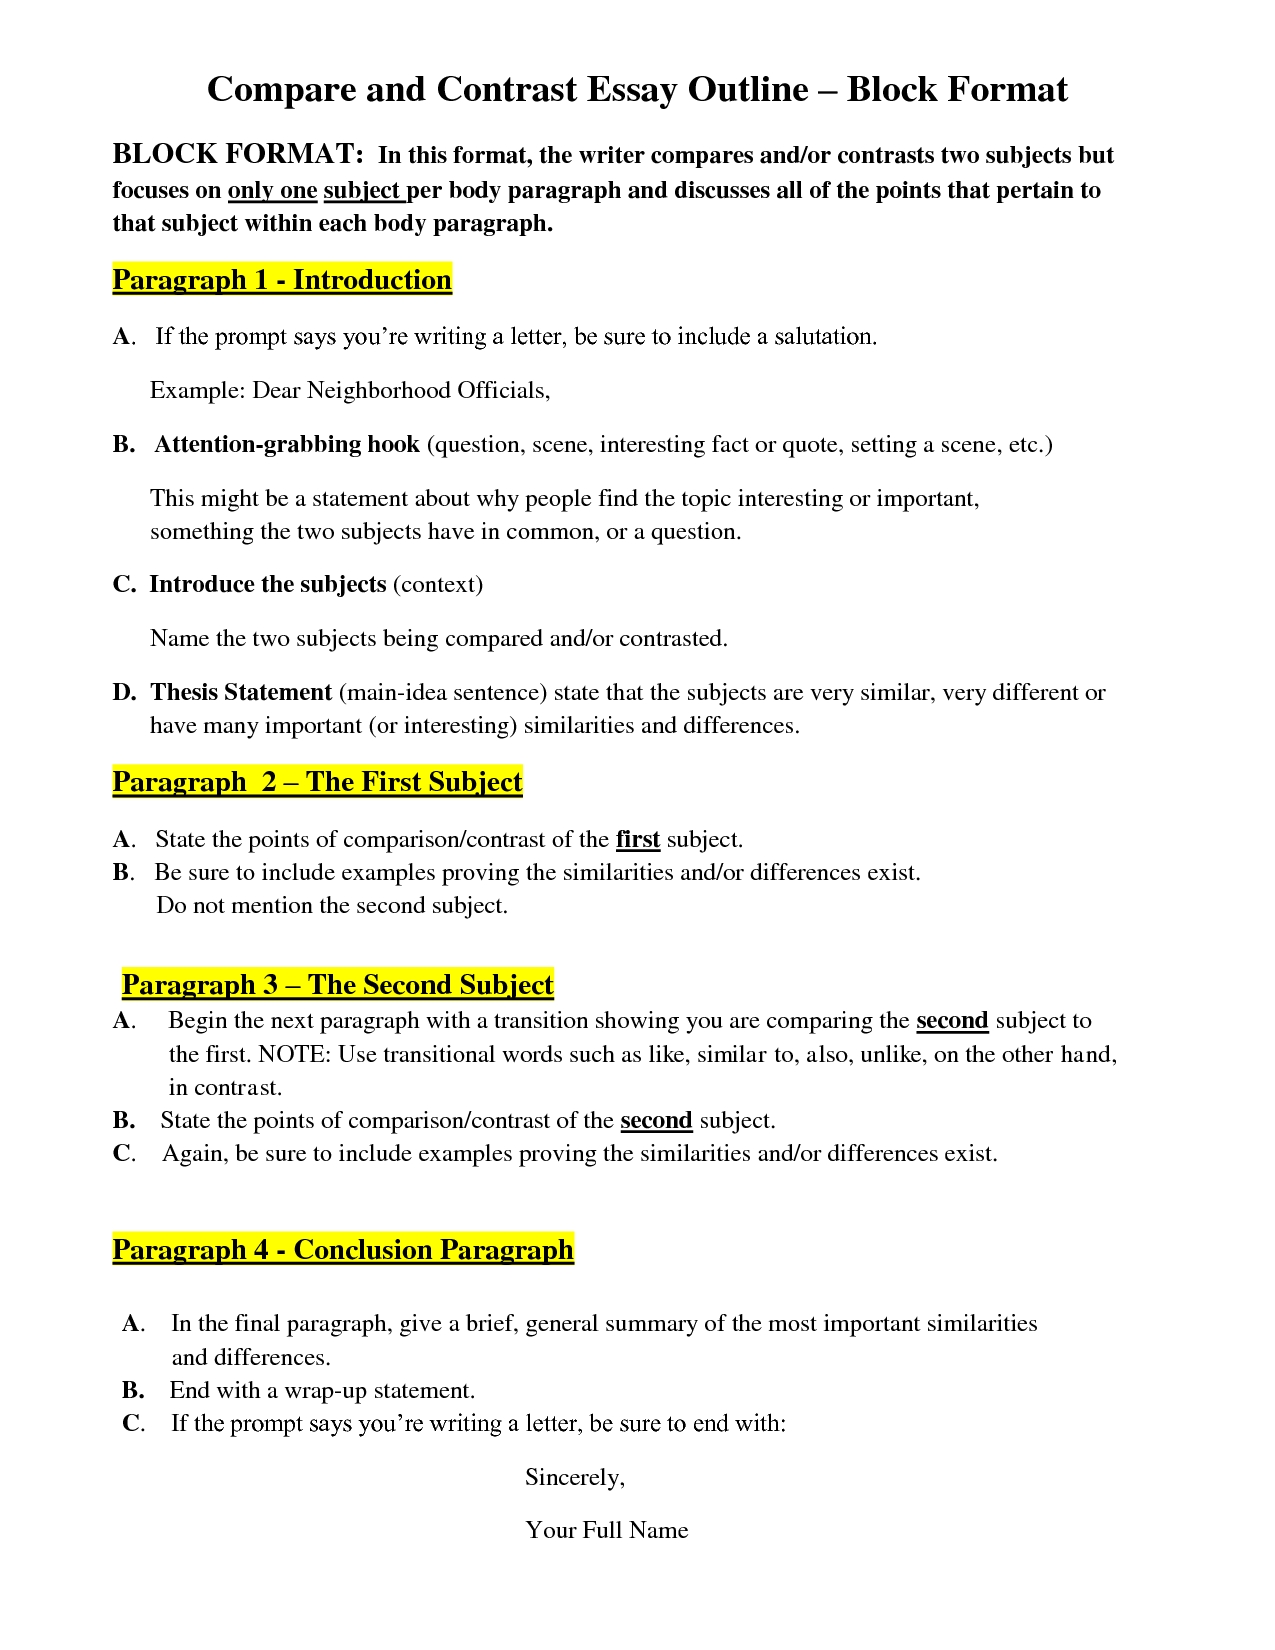 thesis examples for compare and contrast essay